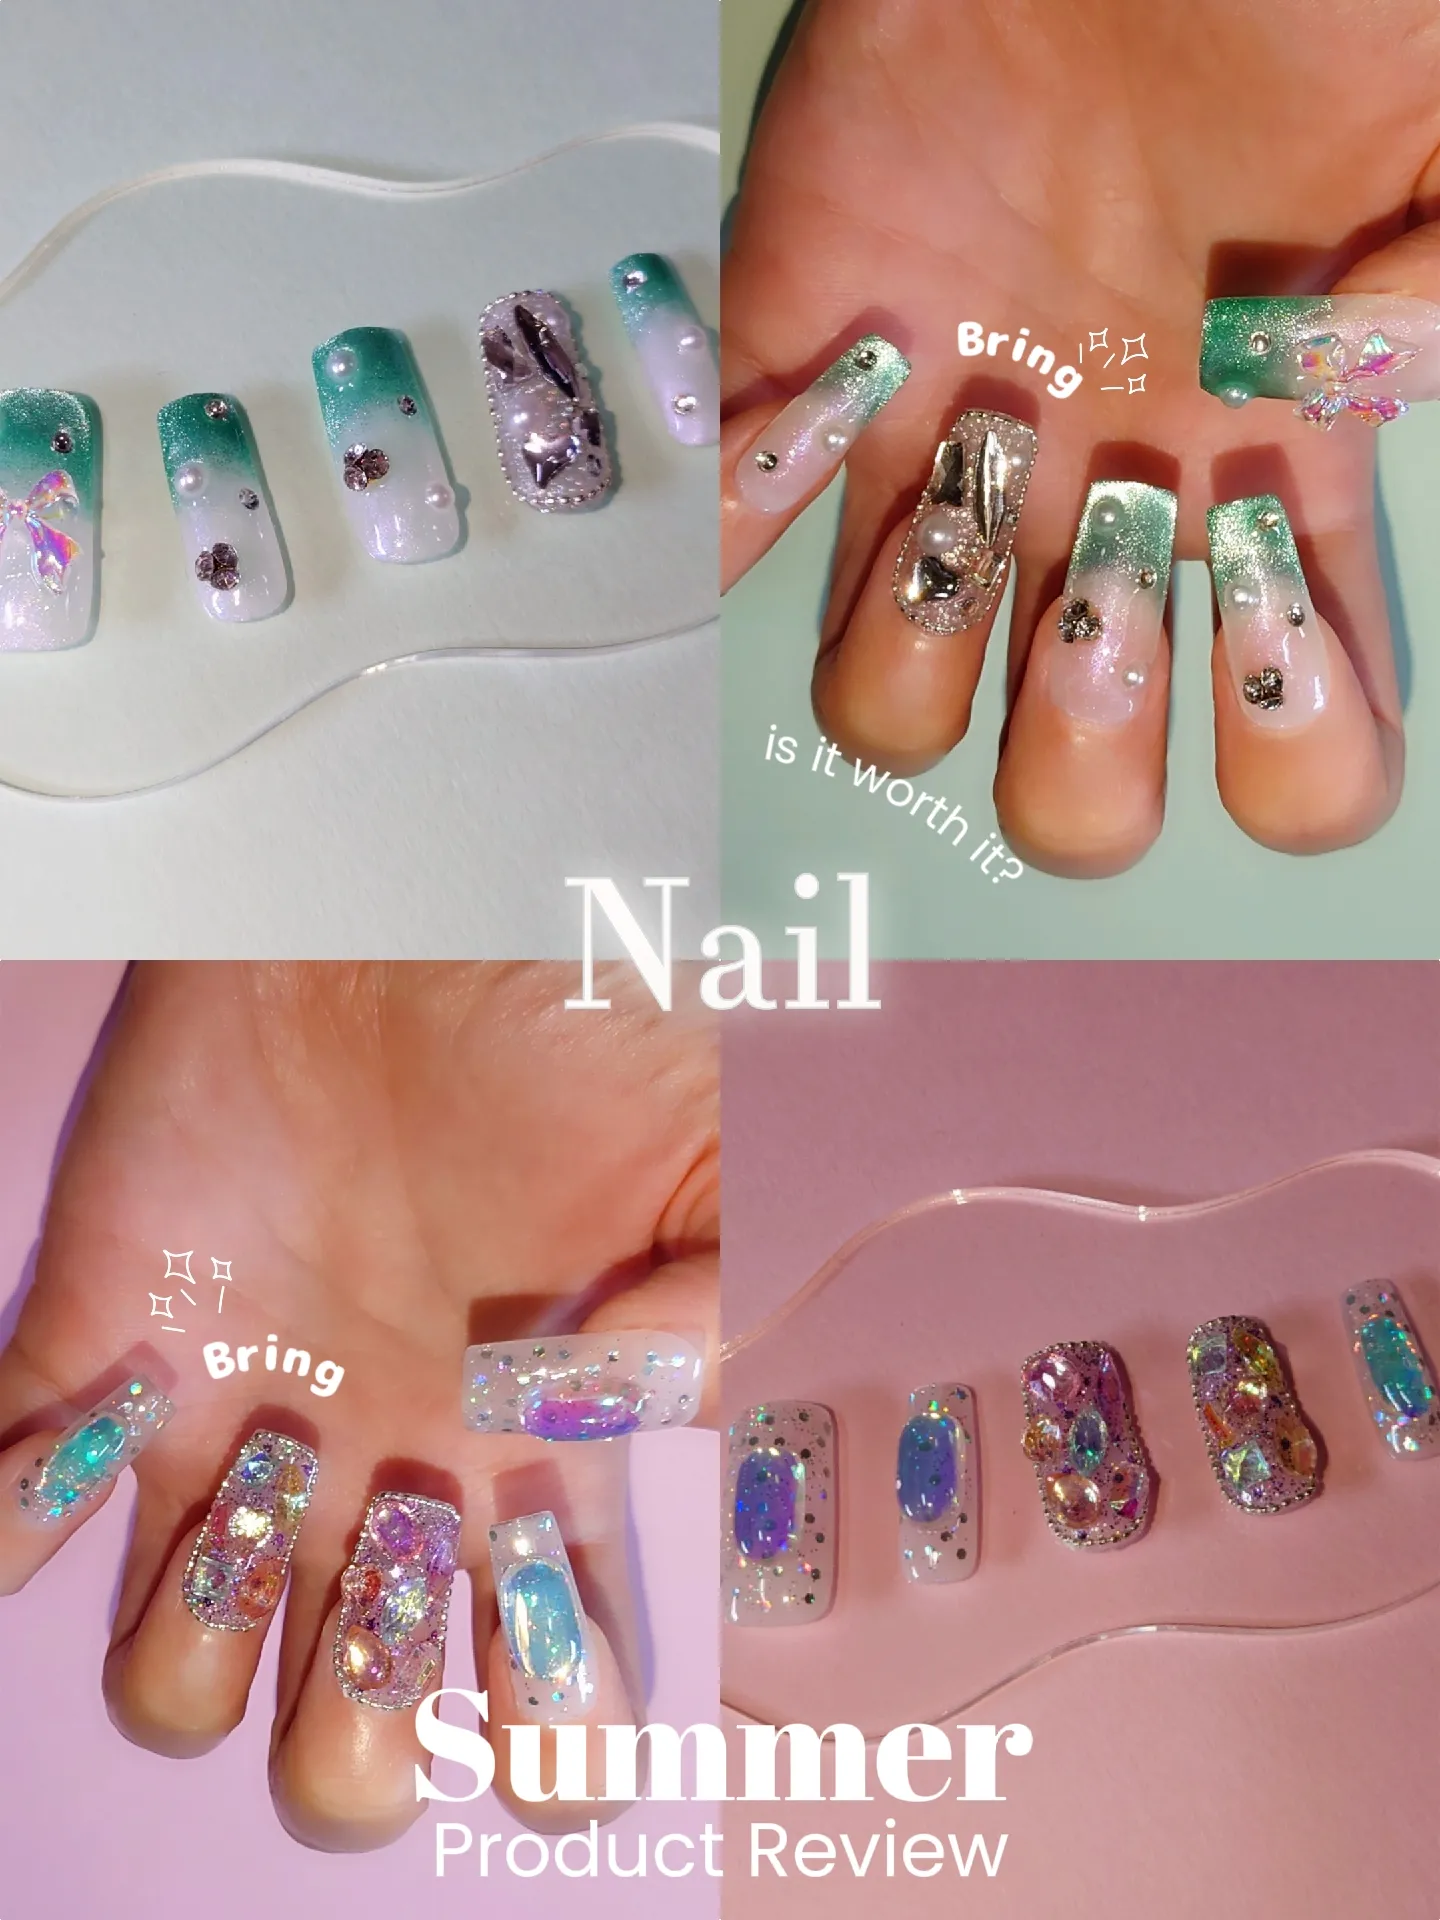 74 Summer Nail Art Designs I've Saved for My Next Mani